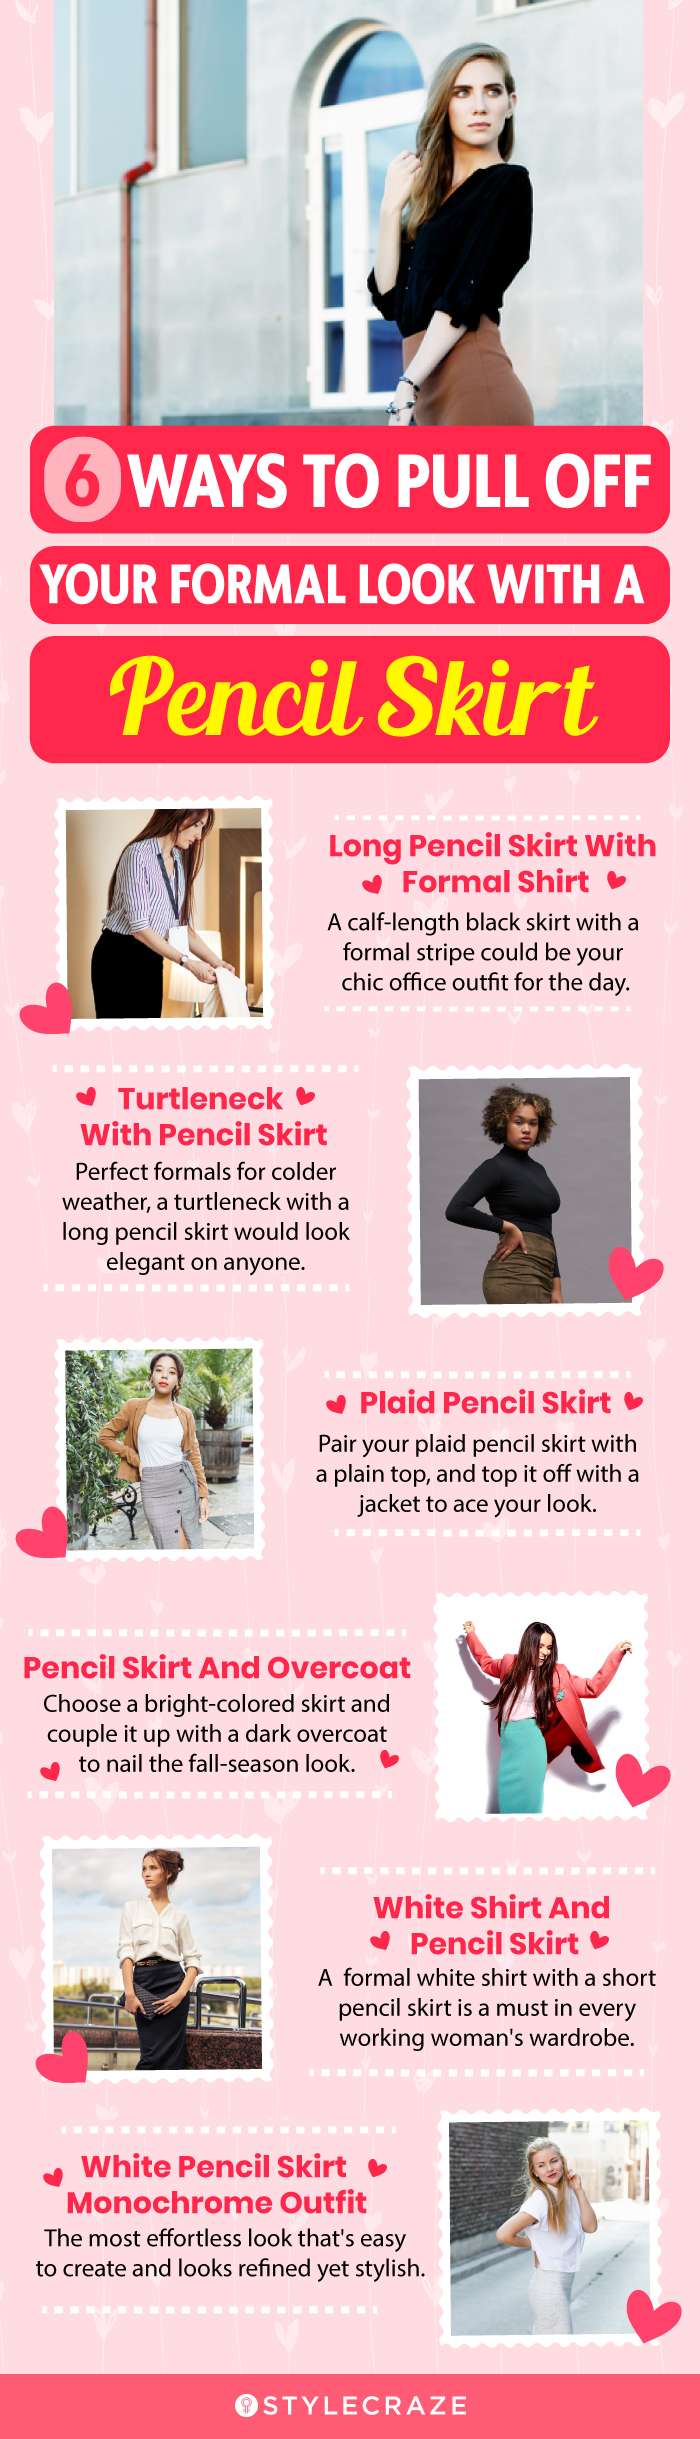 6 ways to pull off your formal look with a pencil skrit[infographic]